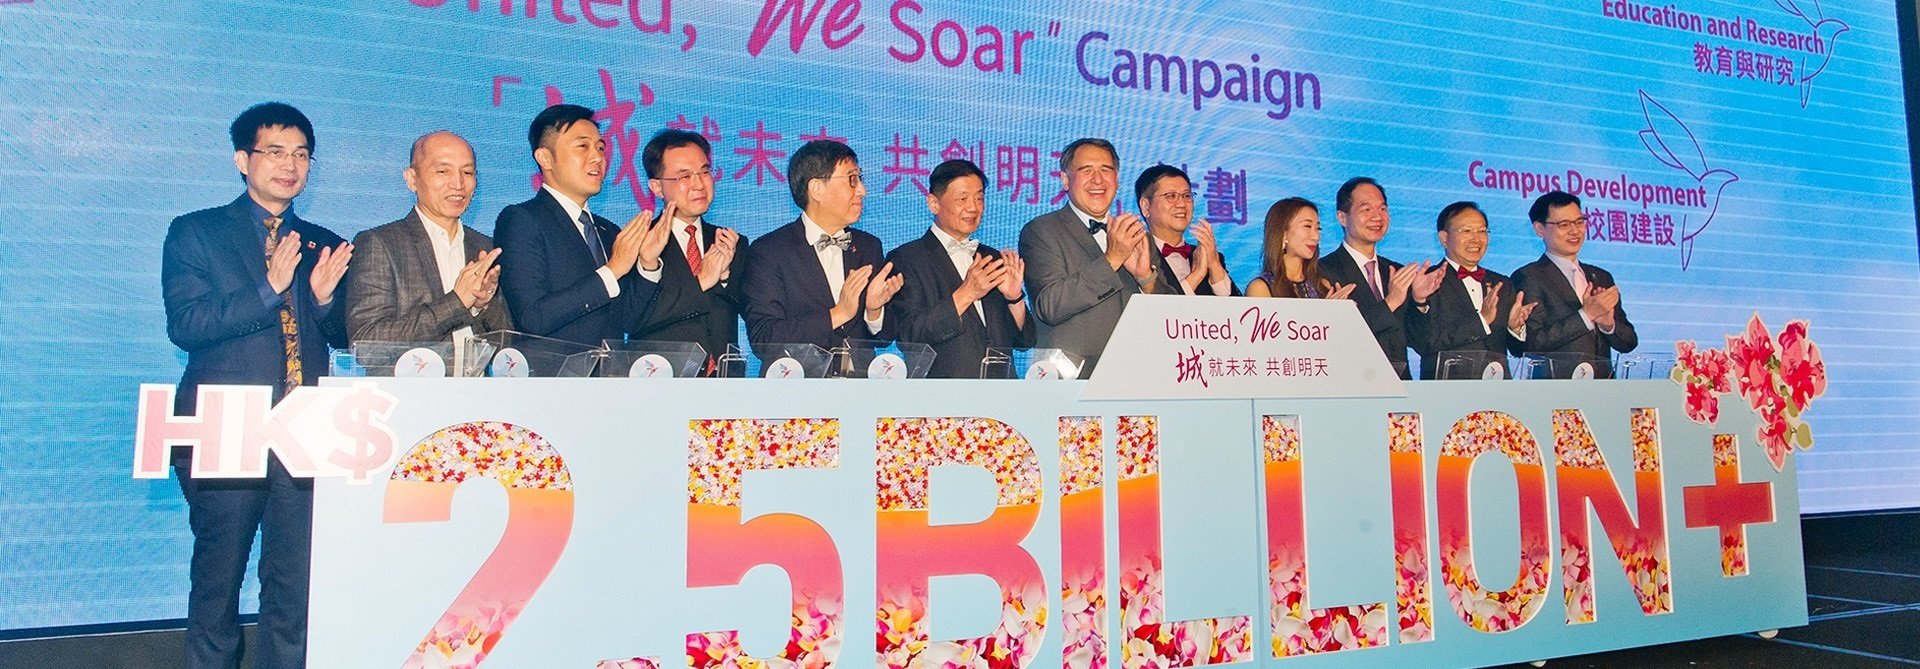 Fundraising soars to new heights